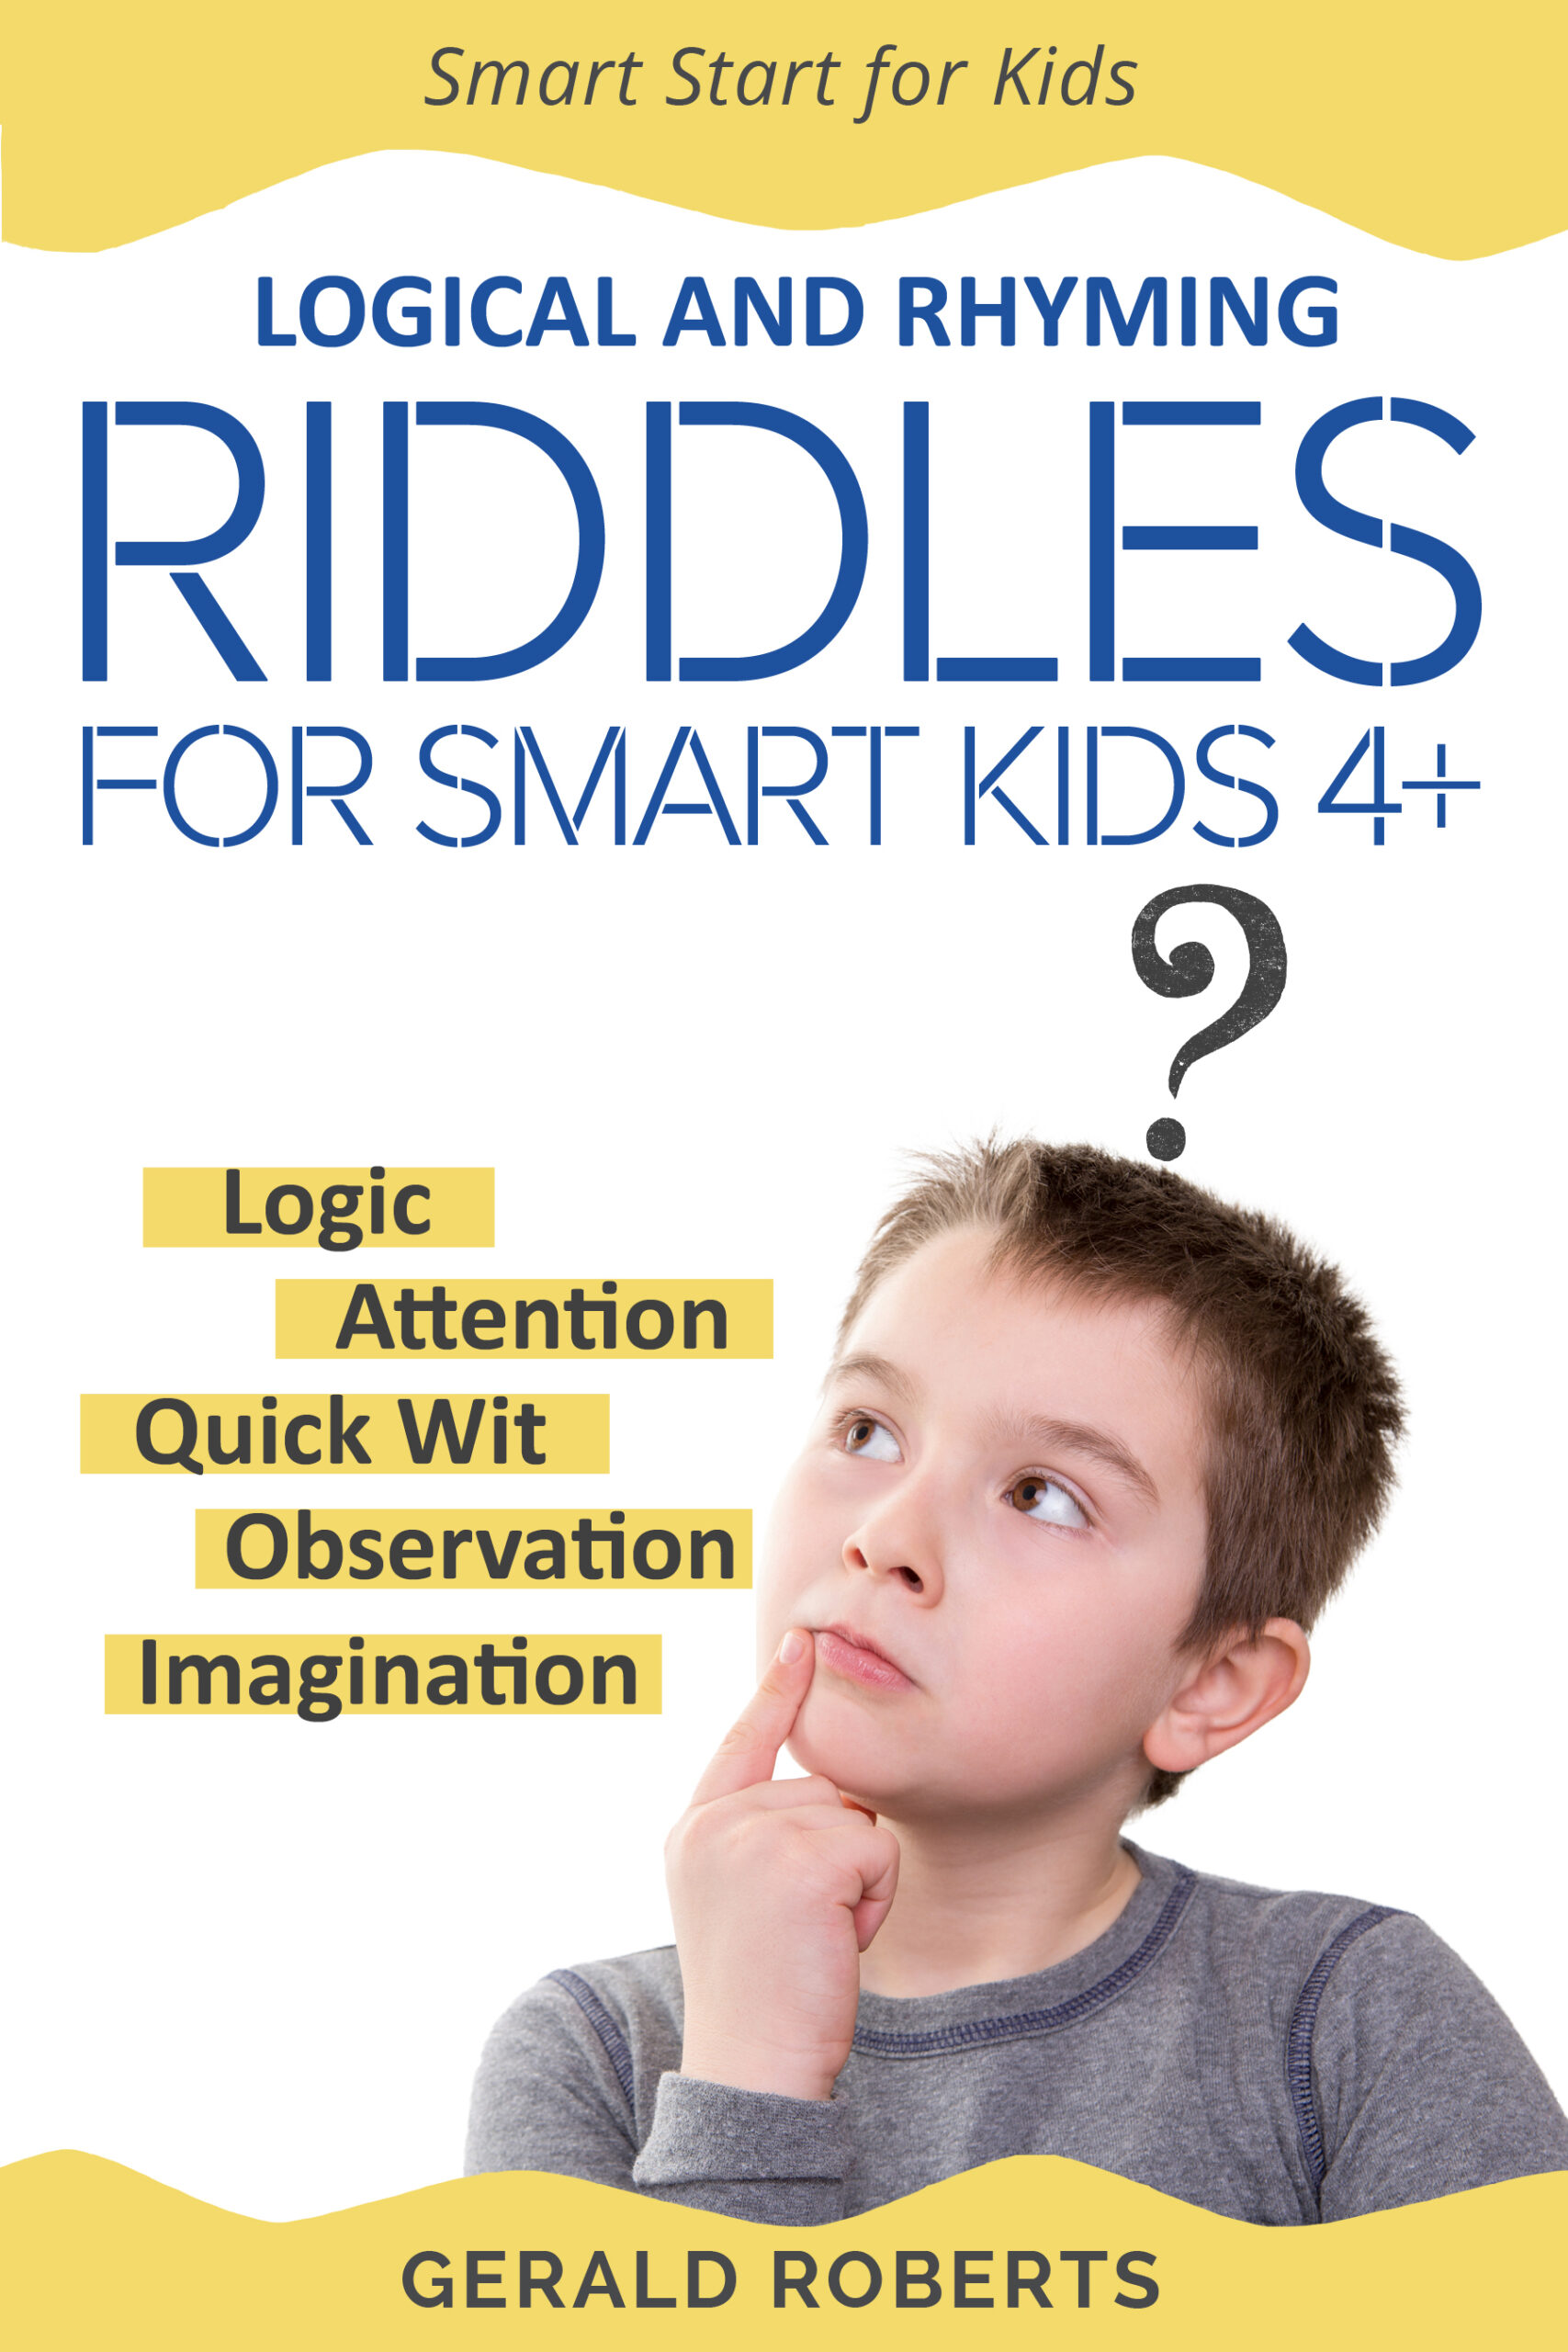 FREE: Logical and Rhyming Riddles for Smart Kids 4+: The Development of Logic, Attention, Quick Wit, Resourcefulness,Observation, Imagination by Gerald Roberts